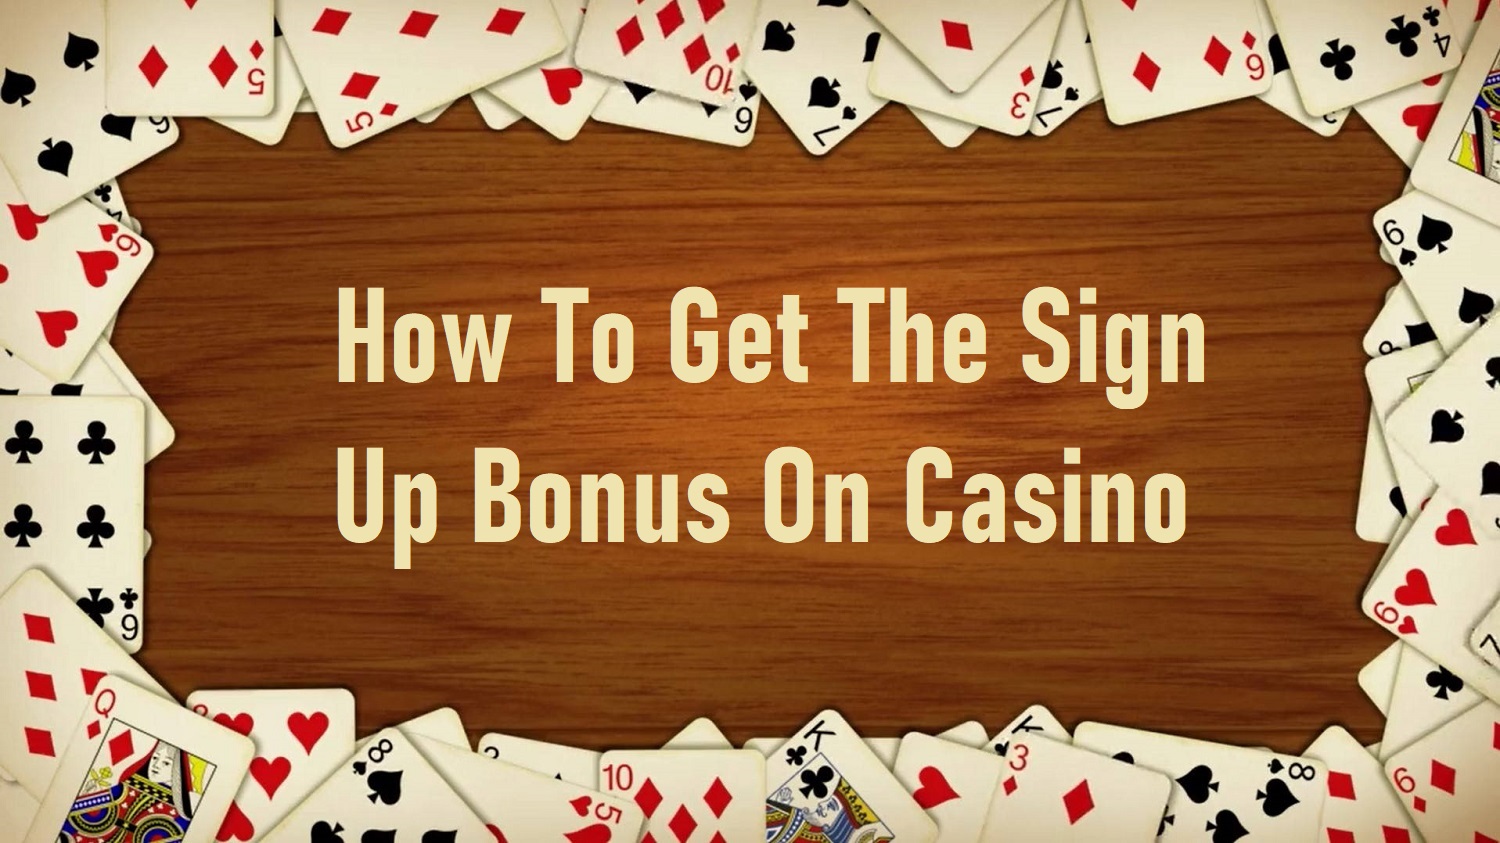 How To Get The Sign Up Bonus On Casino